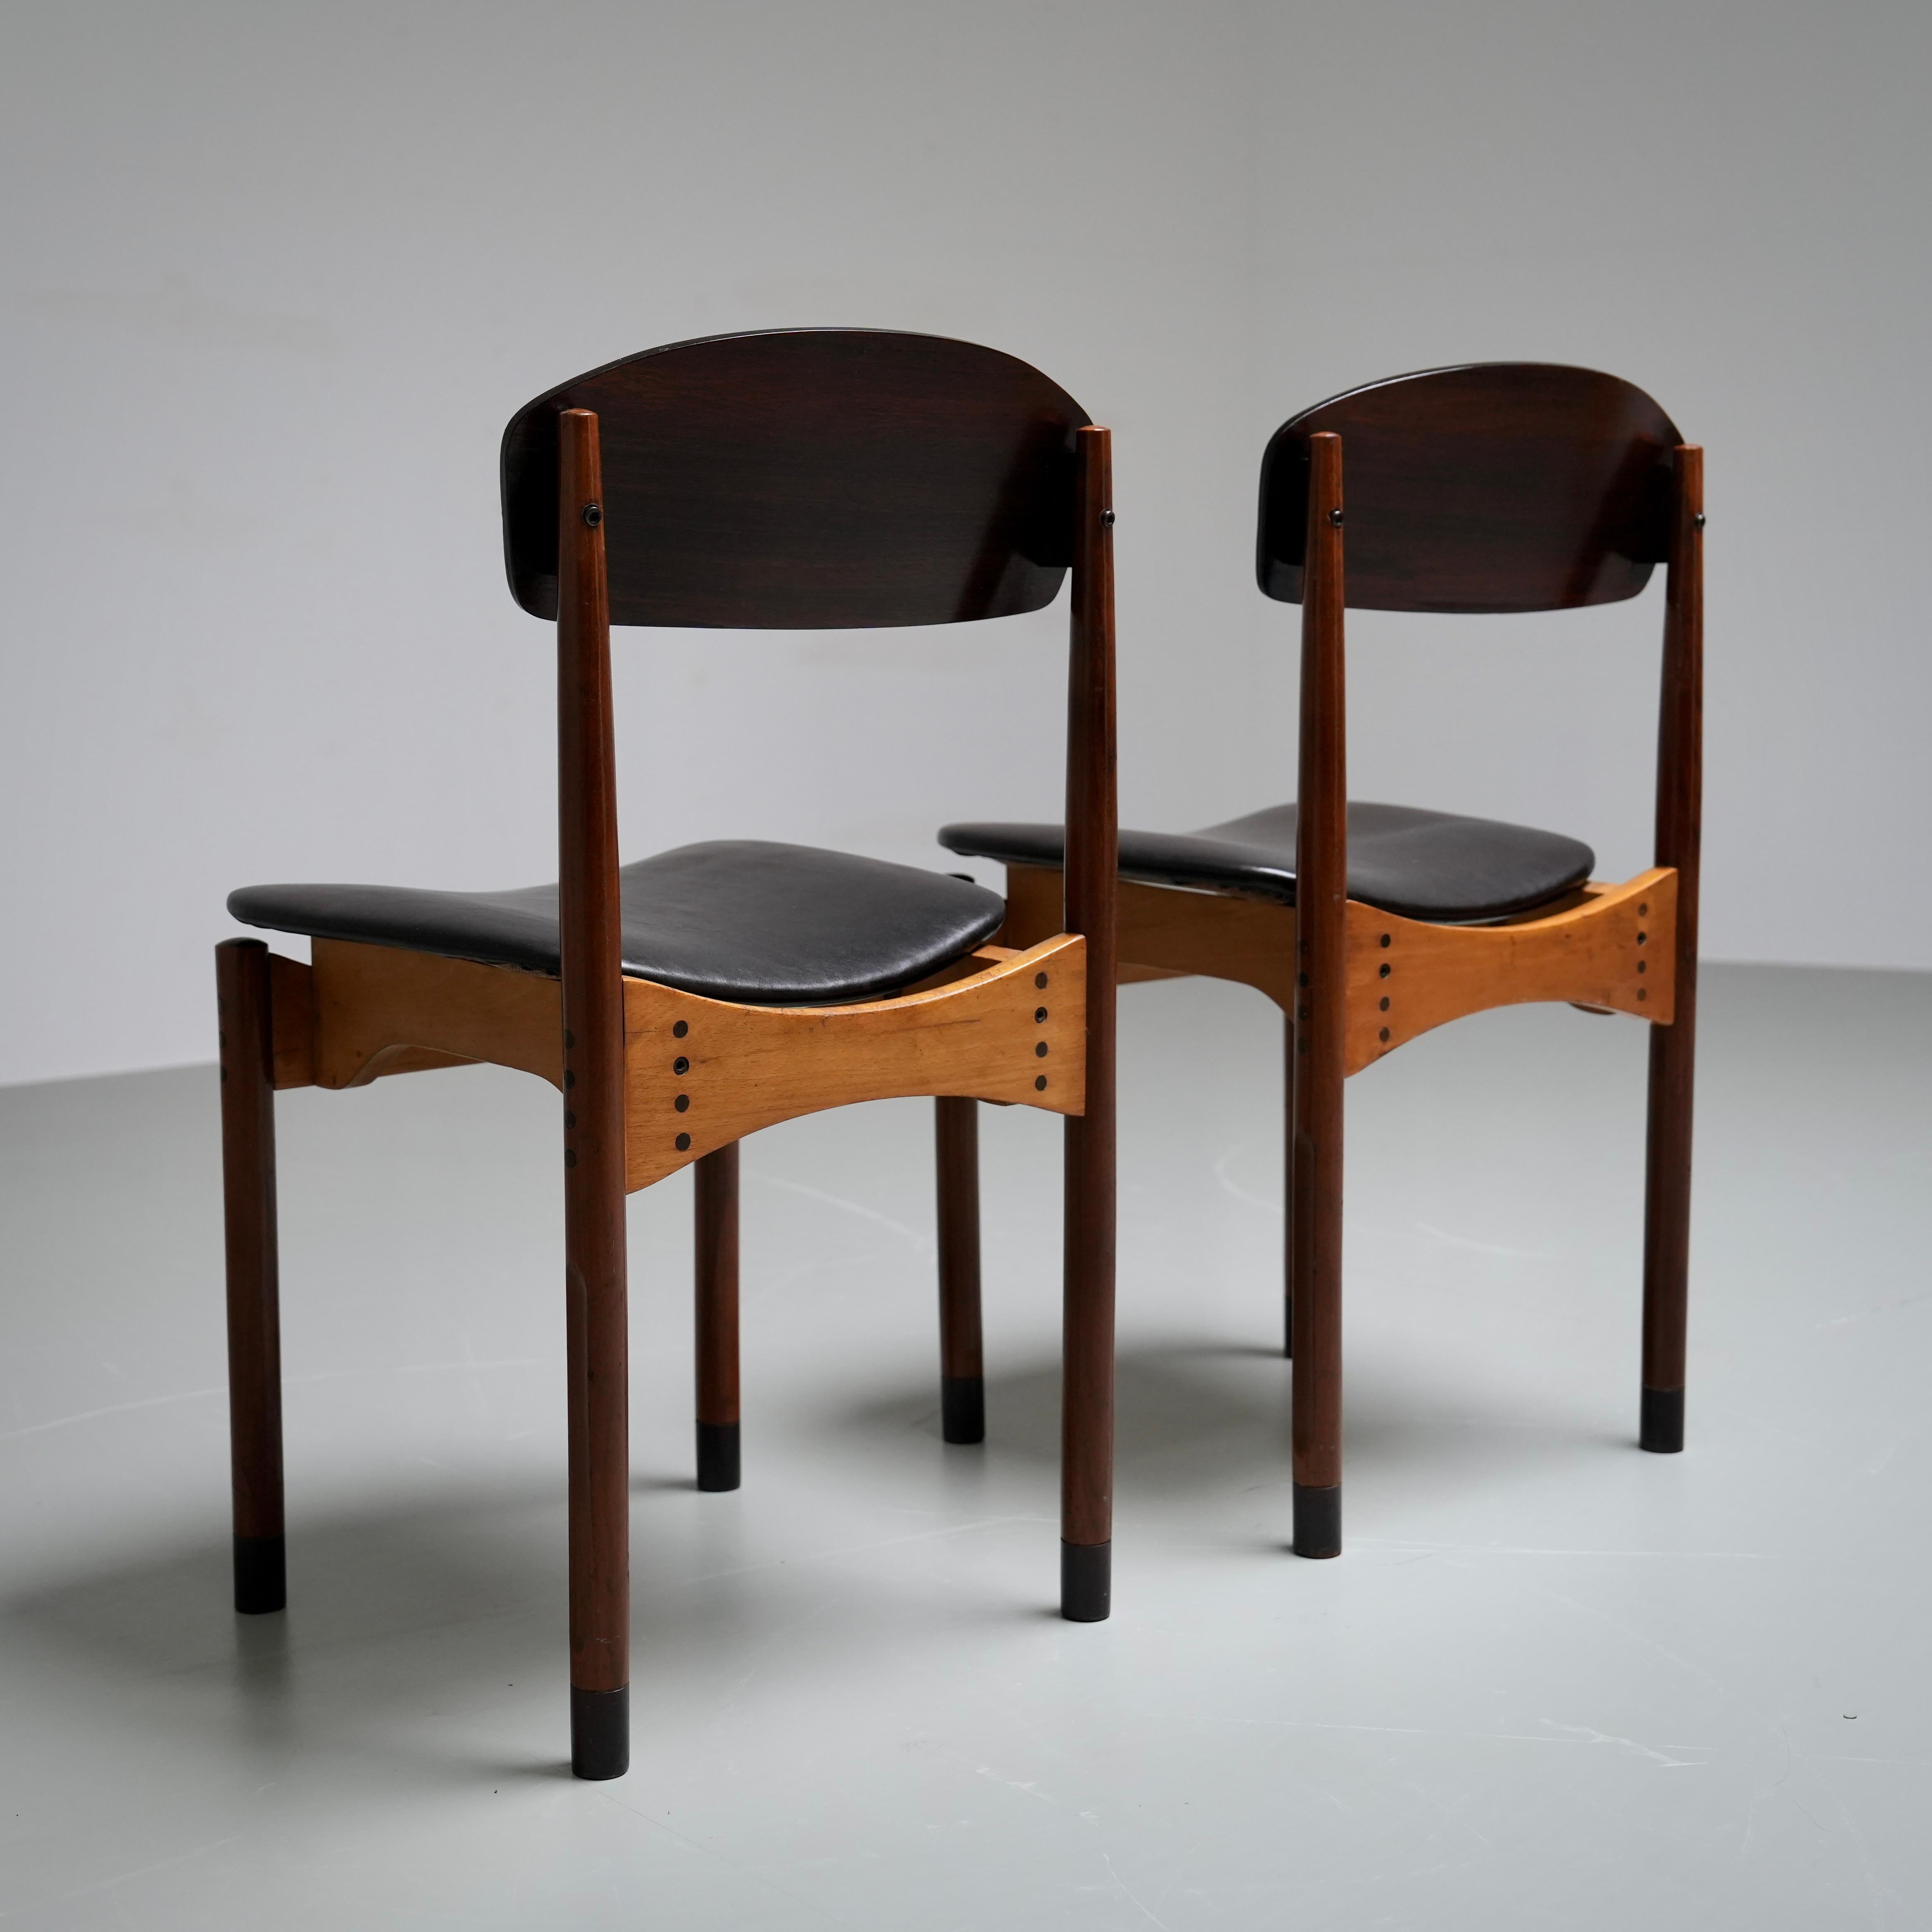 Italian Set of 2 Diningroom Chairs in Teak, Mahogany and faux leather, Italty, 1960's For Sale